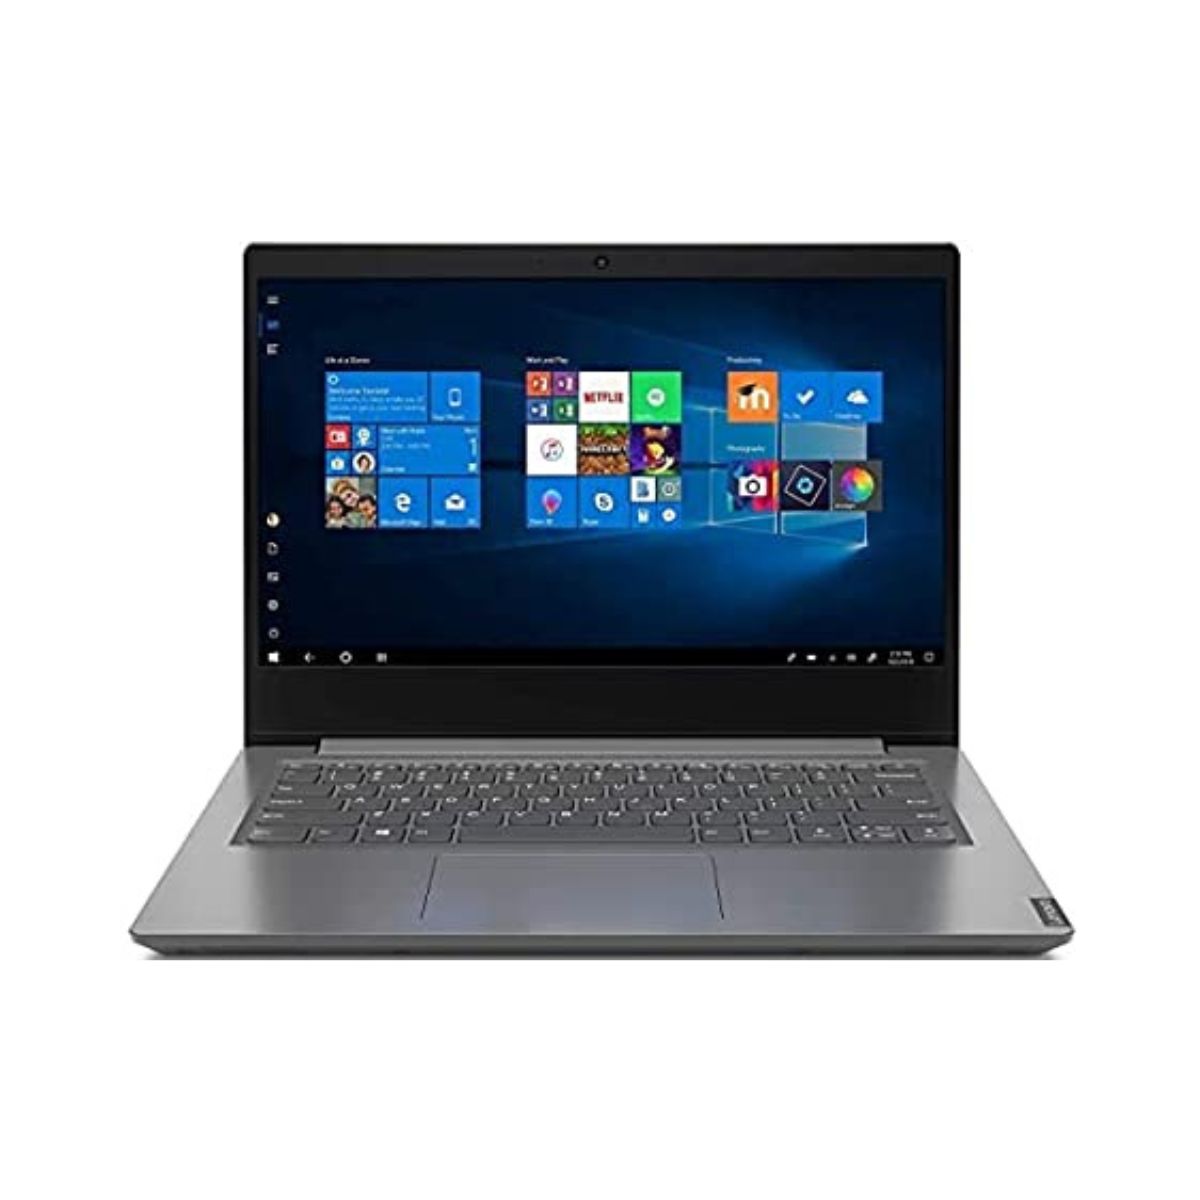 Lenovo V14 G2 ITL - Intel i3-1115G4 3Hz - RAM 8GB - 256GB SSD - Integrated - 14 Inches - 2Cell Battery - Windows 11 - Iron Grey (with Free Accessories - Bag, Mouse And Key Board Guard)